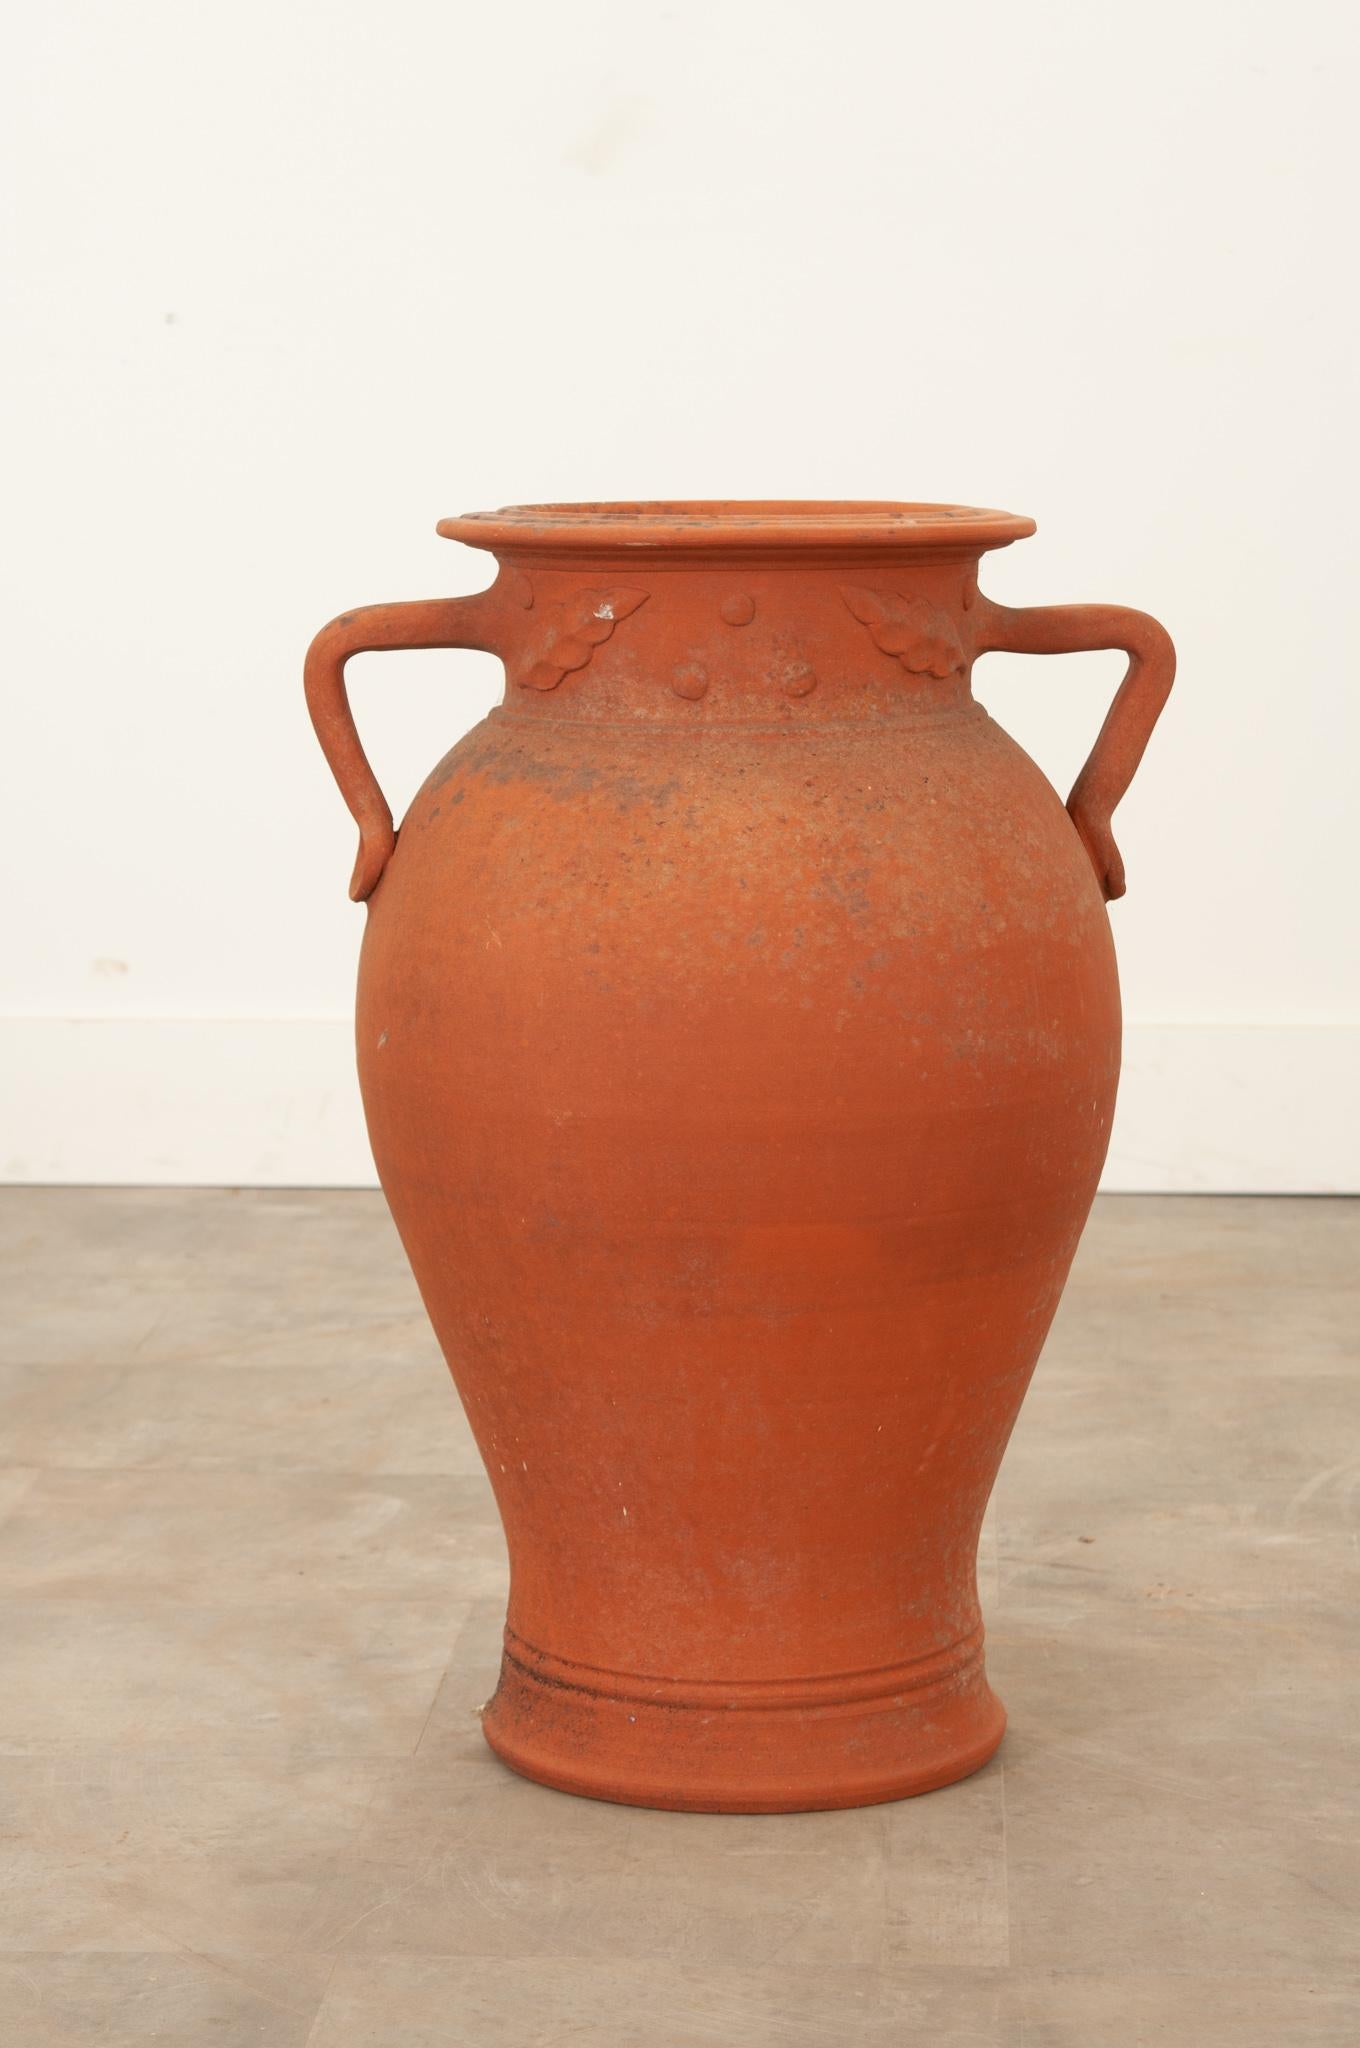 A beautiful unglazed terracotta urn from England, circa 1860. It has gained a great patina from years of exposure, giving it a unique texture and fleck of color. A pair of shaped handles attach within a freeze of stylized leaves and olives. Make